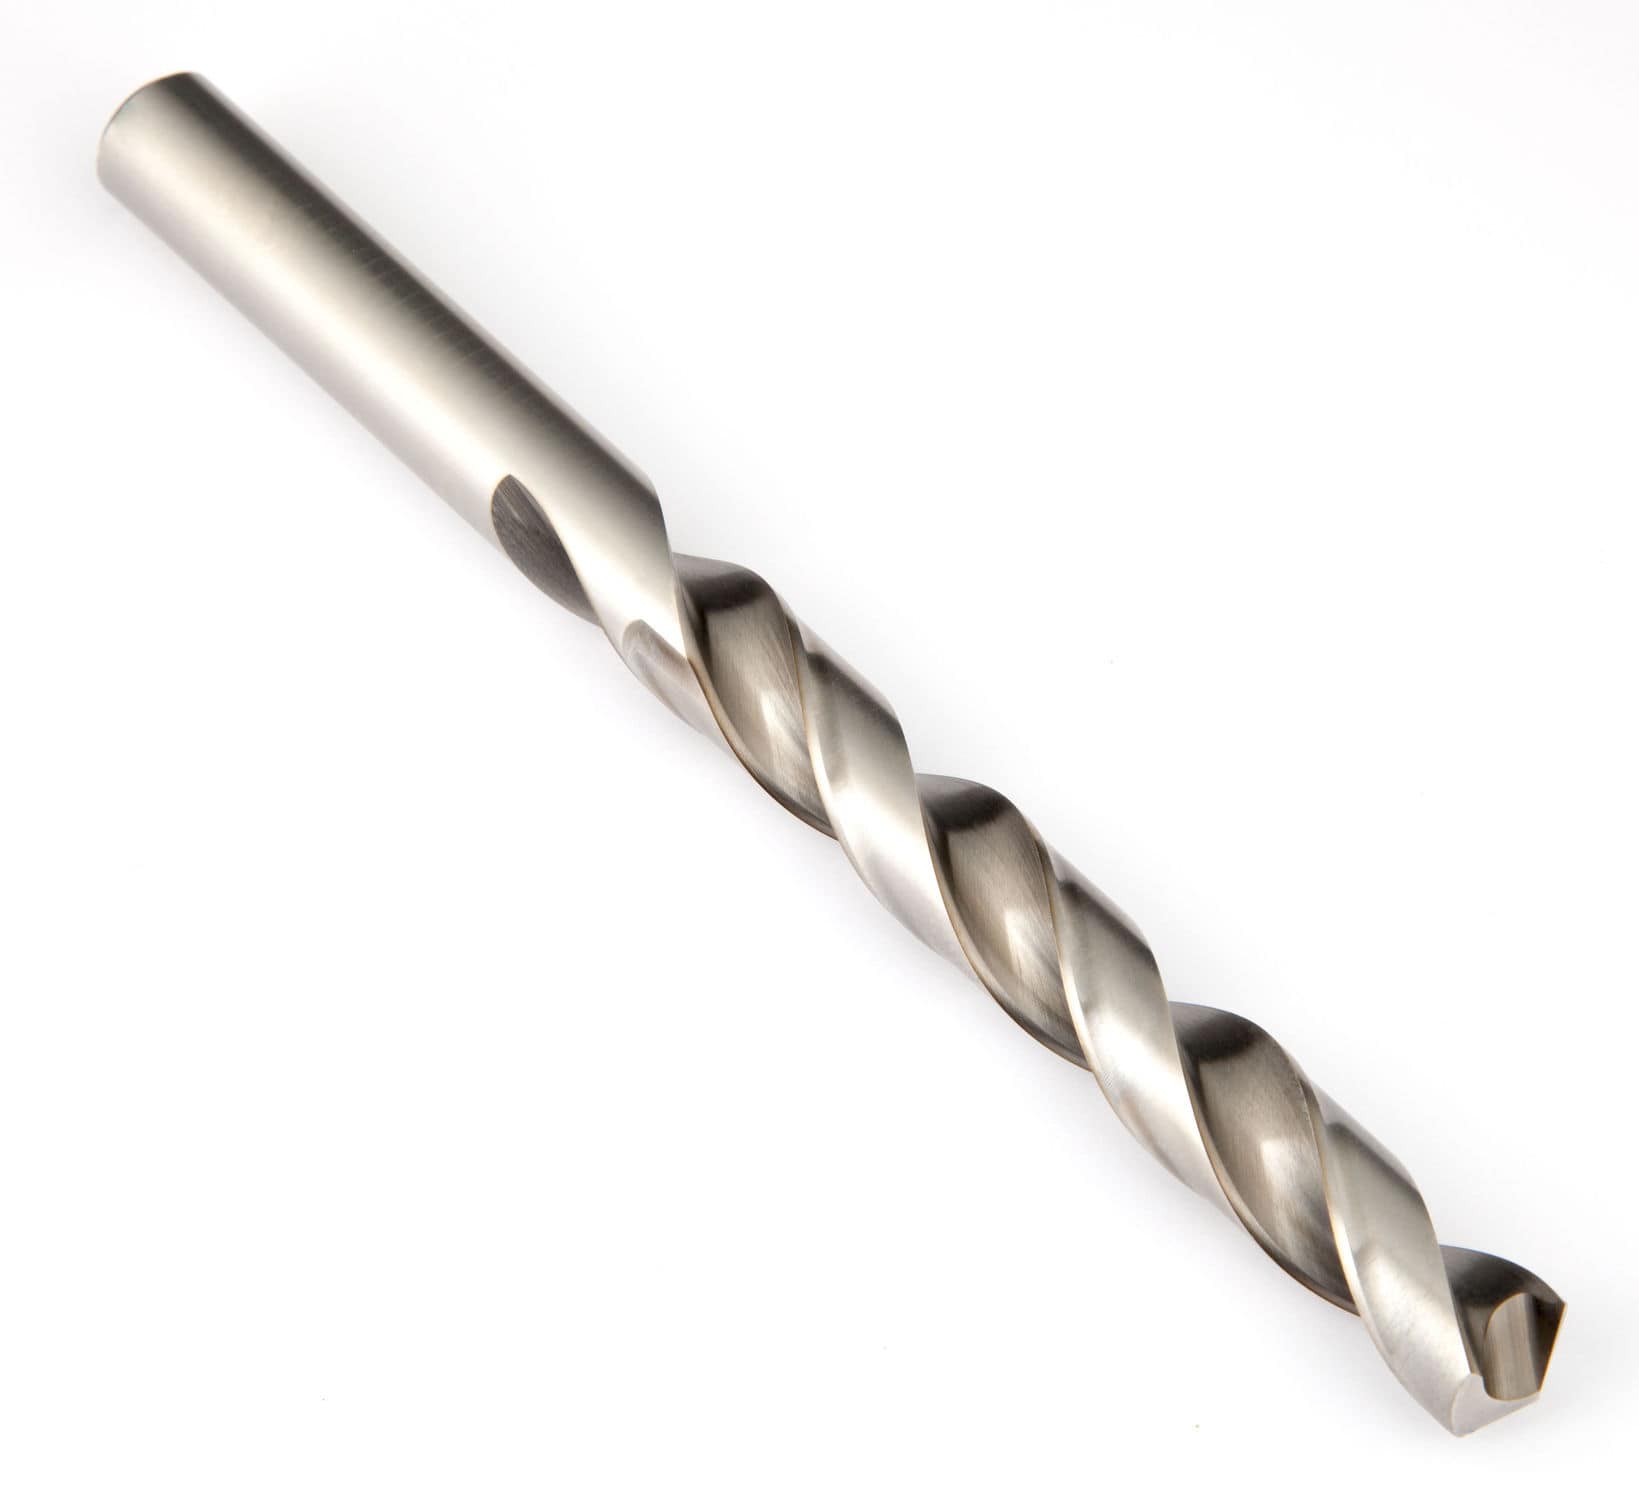 Twist drill bit / solid / for stainless steel / HSS-E - A147 ...